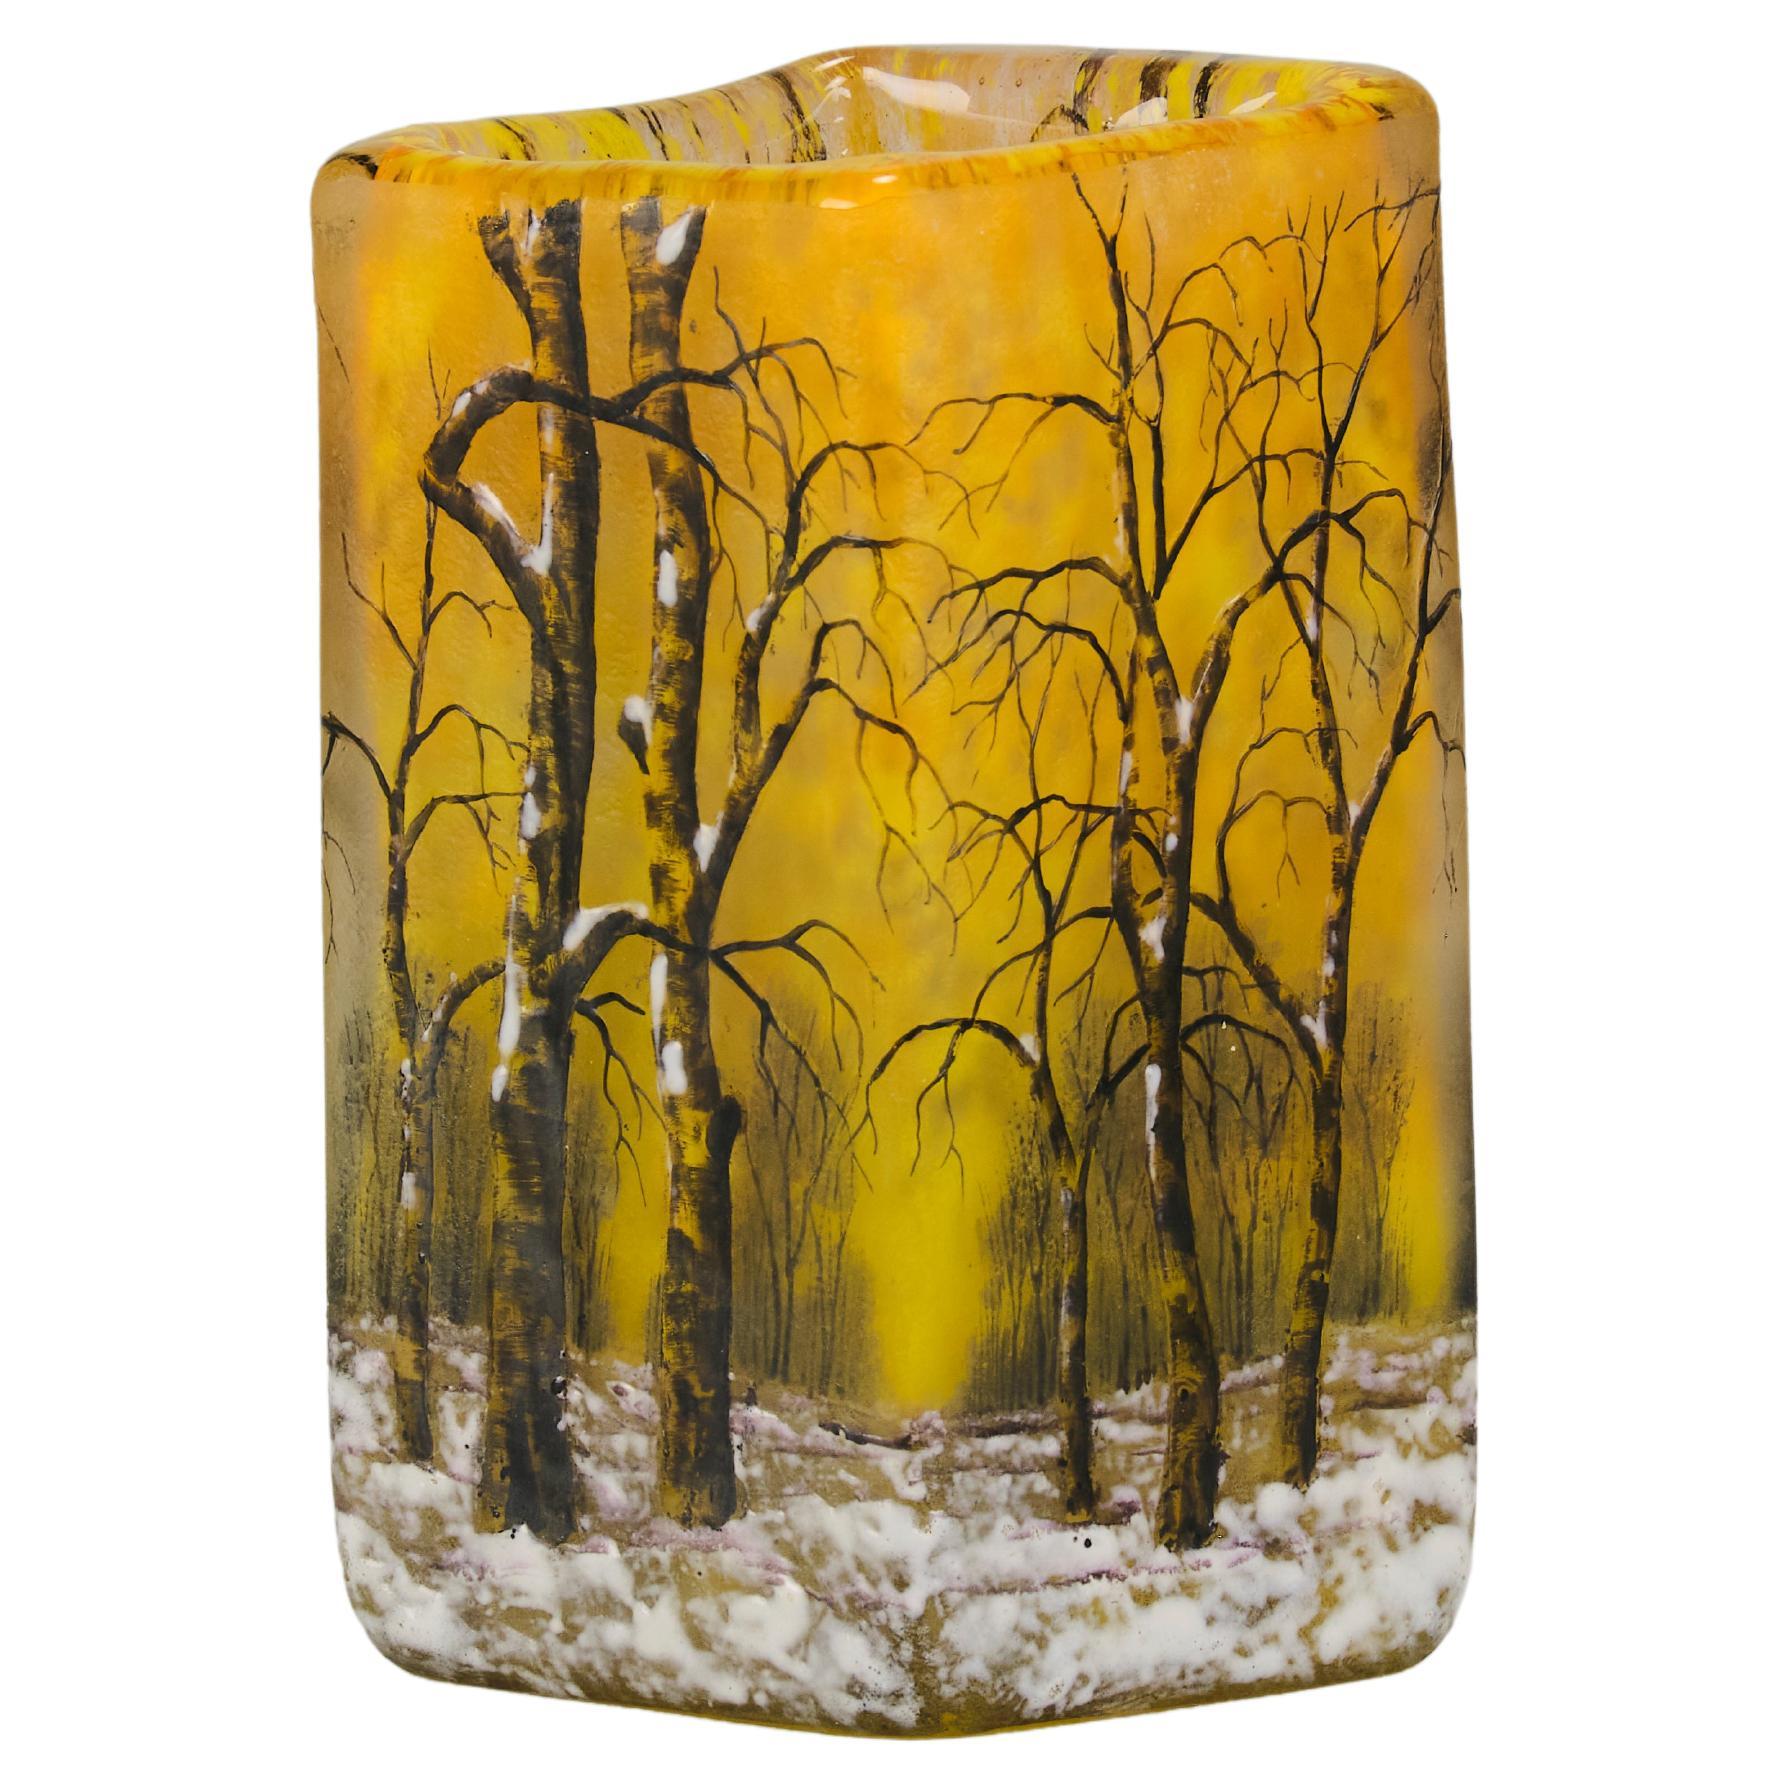 Early 20th Century Vase Entitled "Winter Vase" by Daum Frères Circa 1900